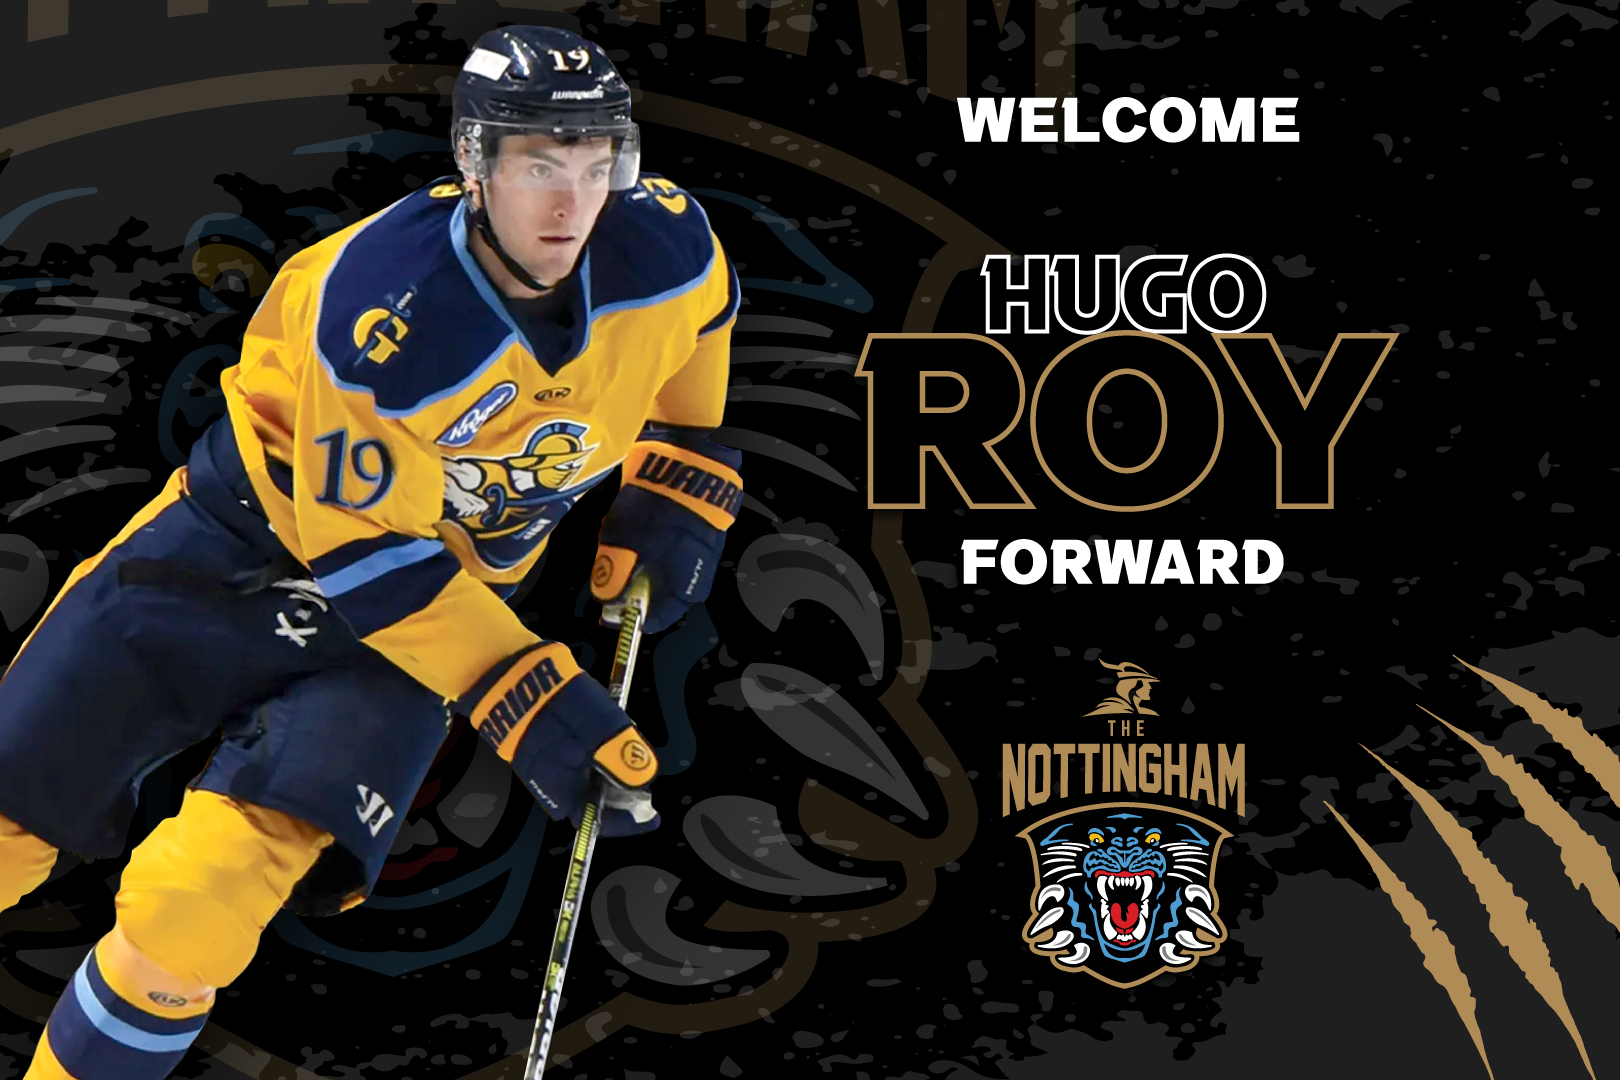 CANADIAN FORWARD ROY JOINS THE NOTTINGHAM PANTHERS Top Image